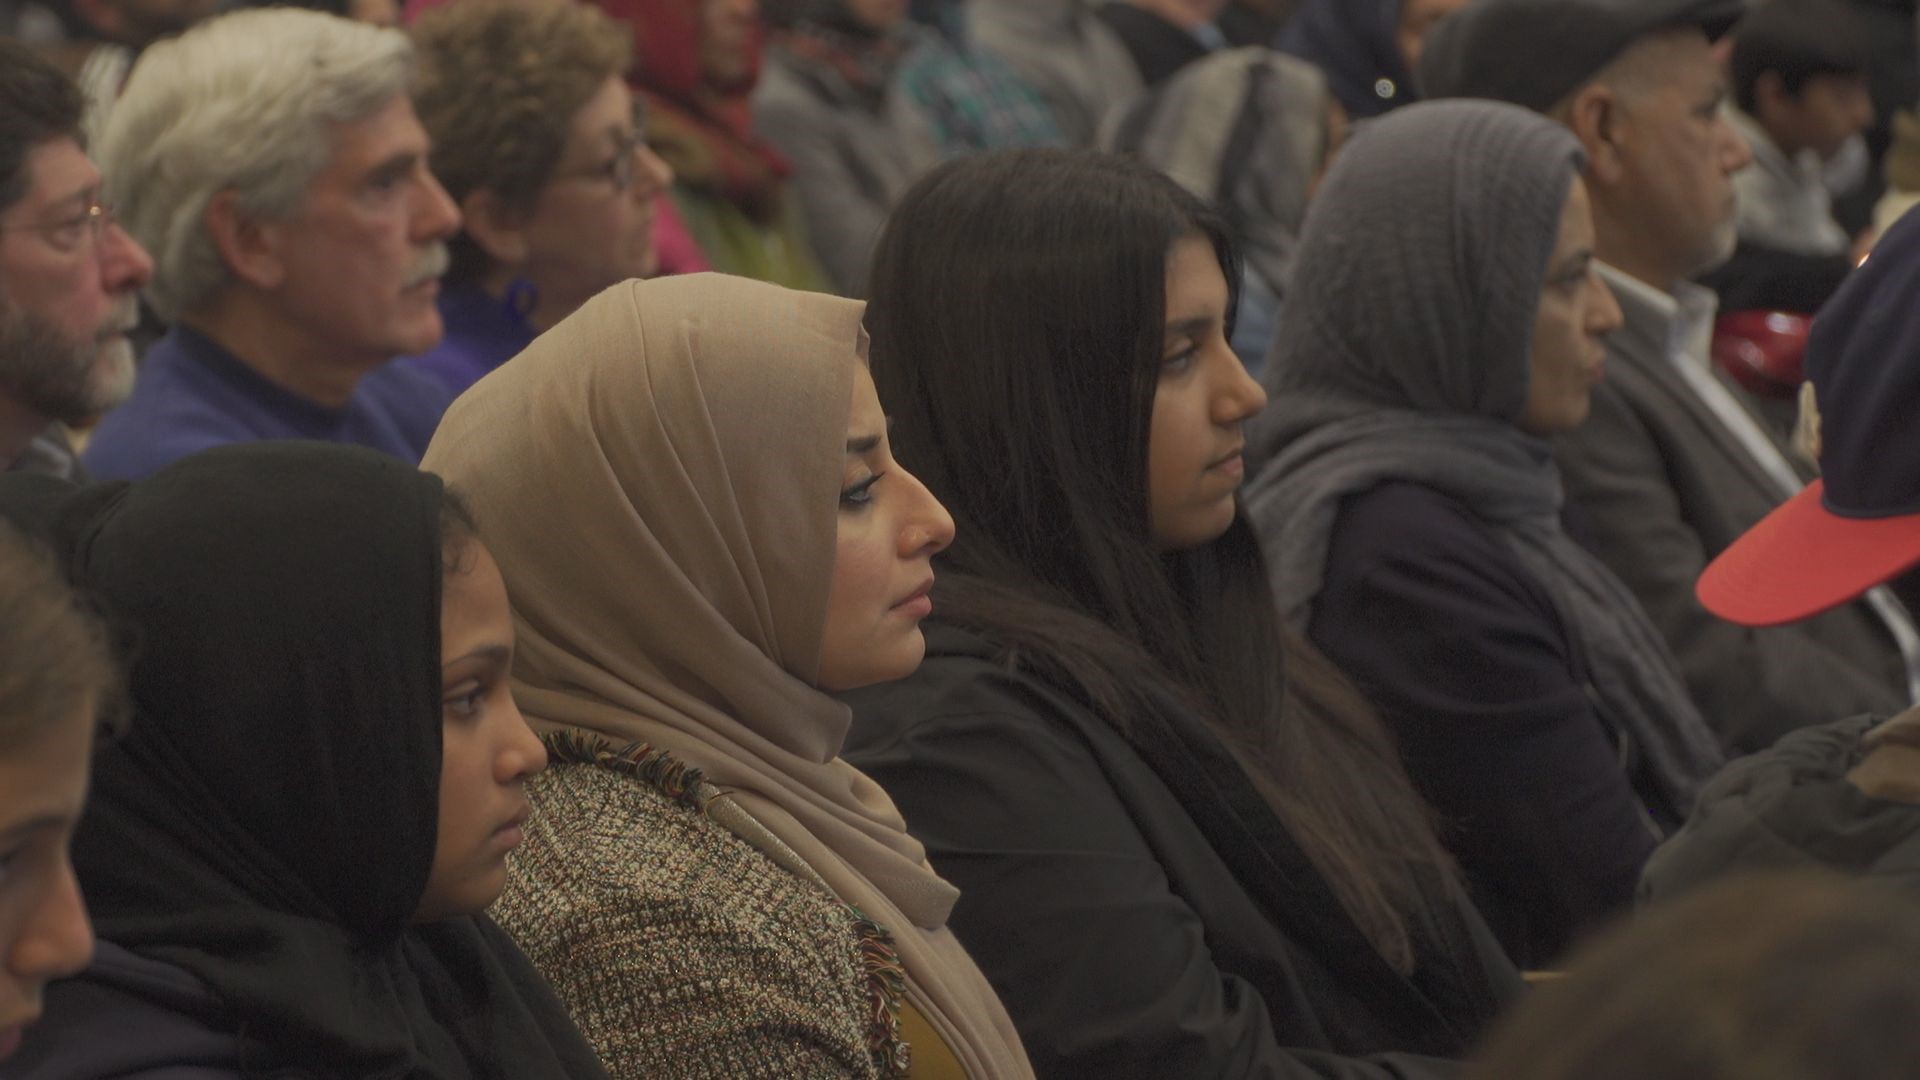 Members of the Sacramento Islamic community and people of all faiths joined at an event focused on healing, unity, and solidarity after the terror attacks in New Zealand. Muslim faith leaders and a panel of mental health experts spoke at the event.